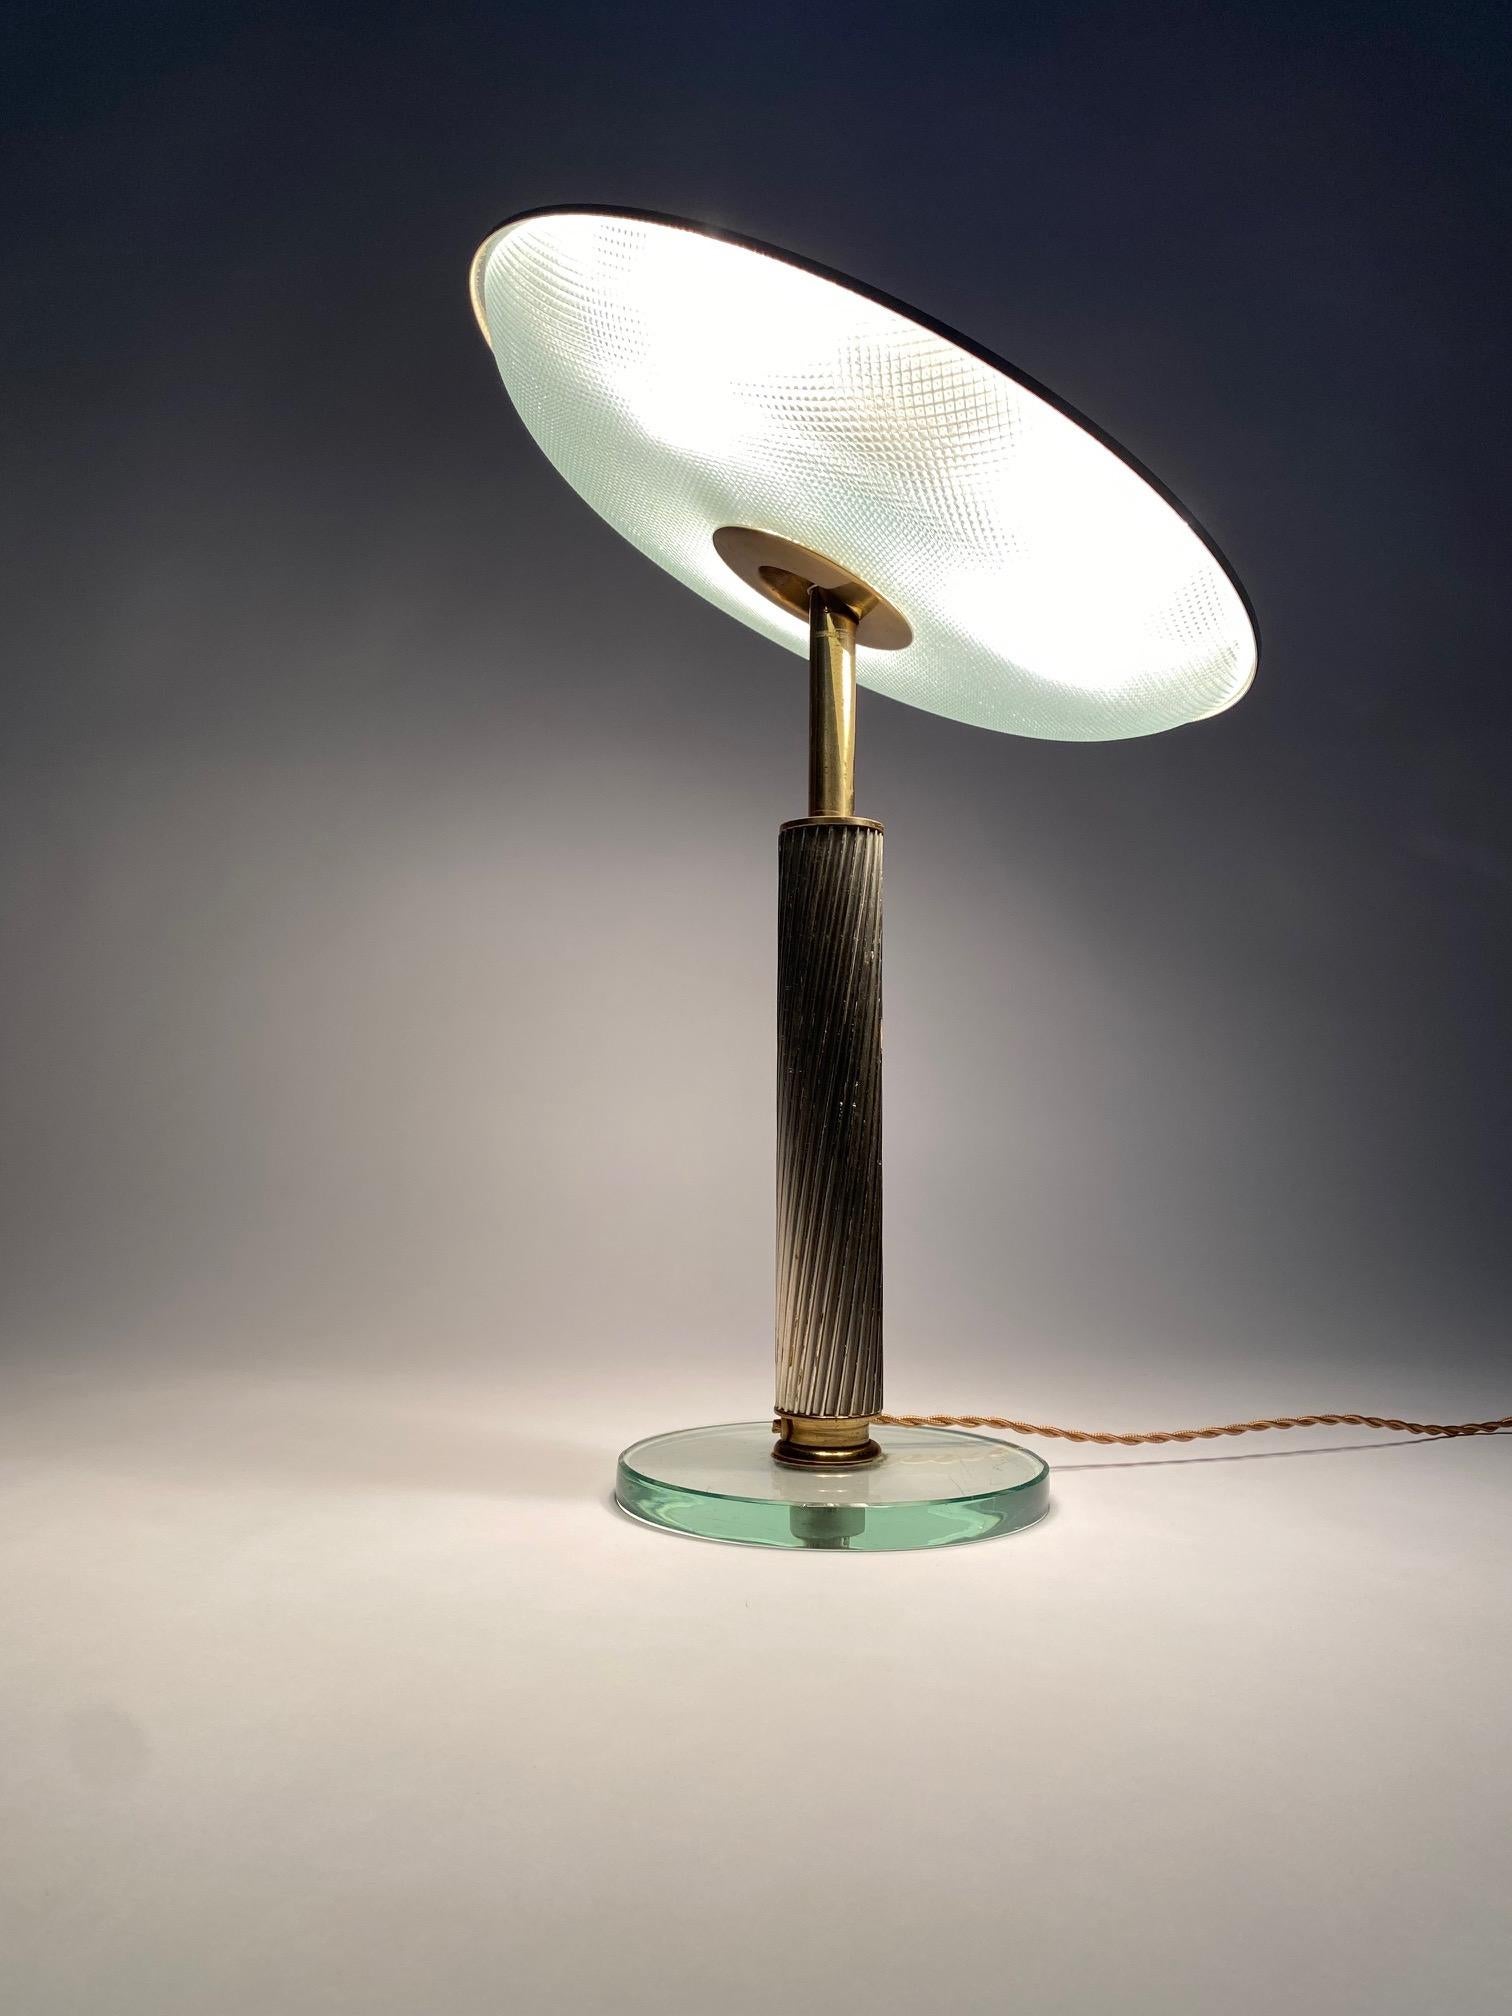 Rare and monumental table lamp created by the famous designer Pietro Chiesa for Fontana Arte, Italy, 1940s.

It is one of the most iconic lamps of 1940s Italian design, elegant and precious but at the same time sober and refined, capable of